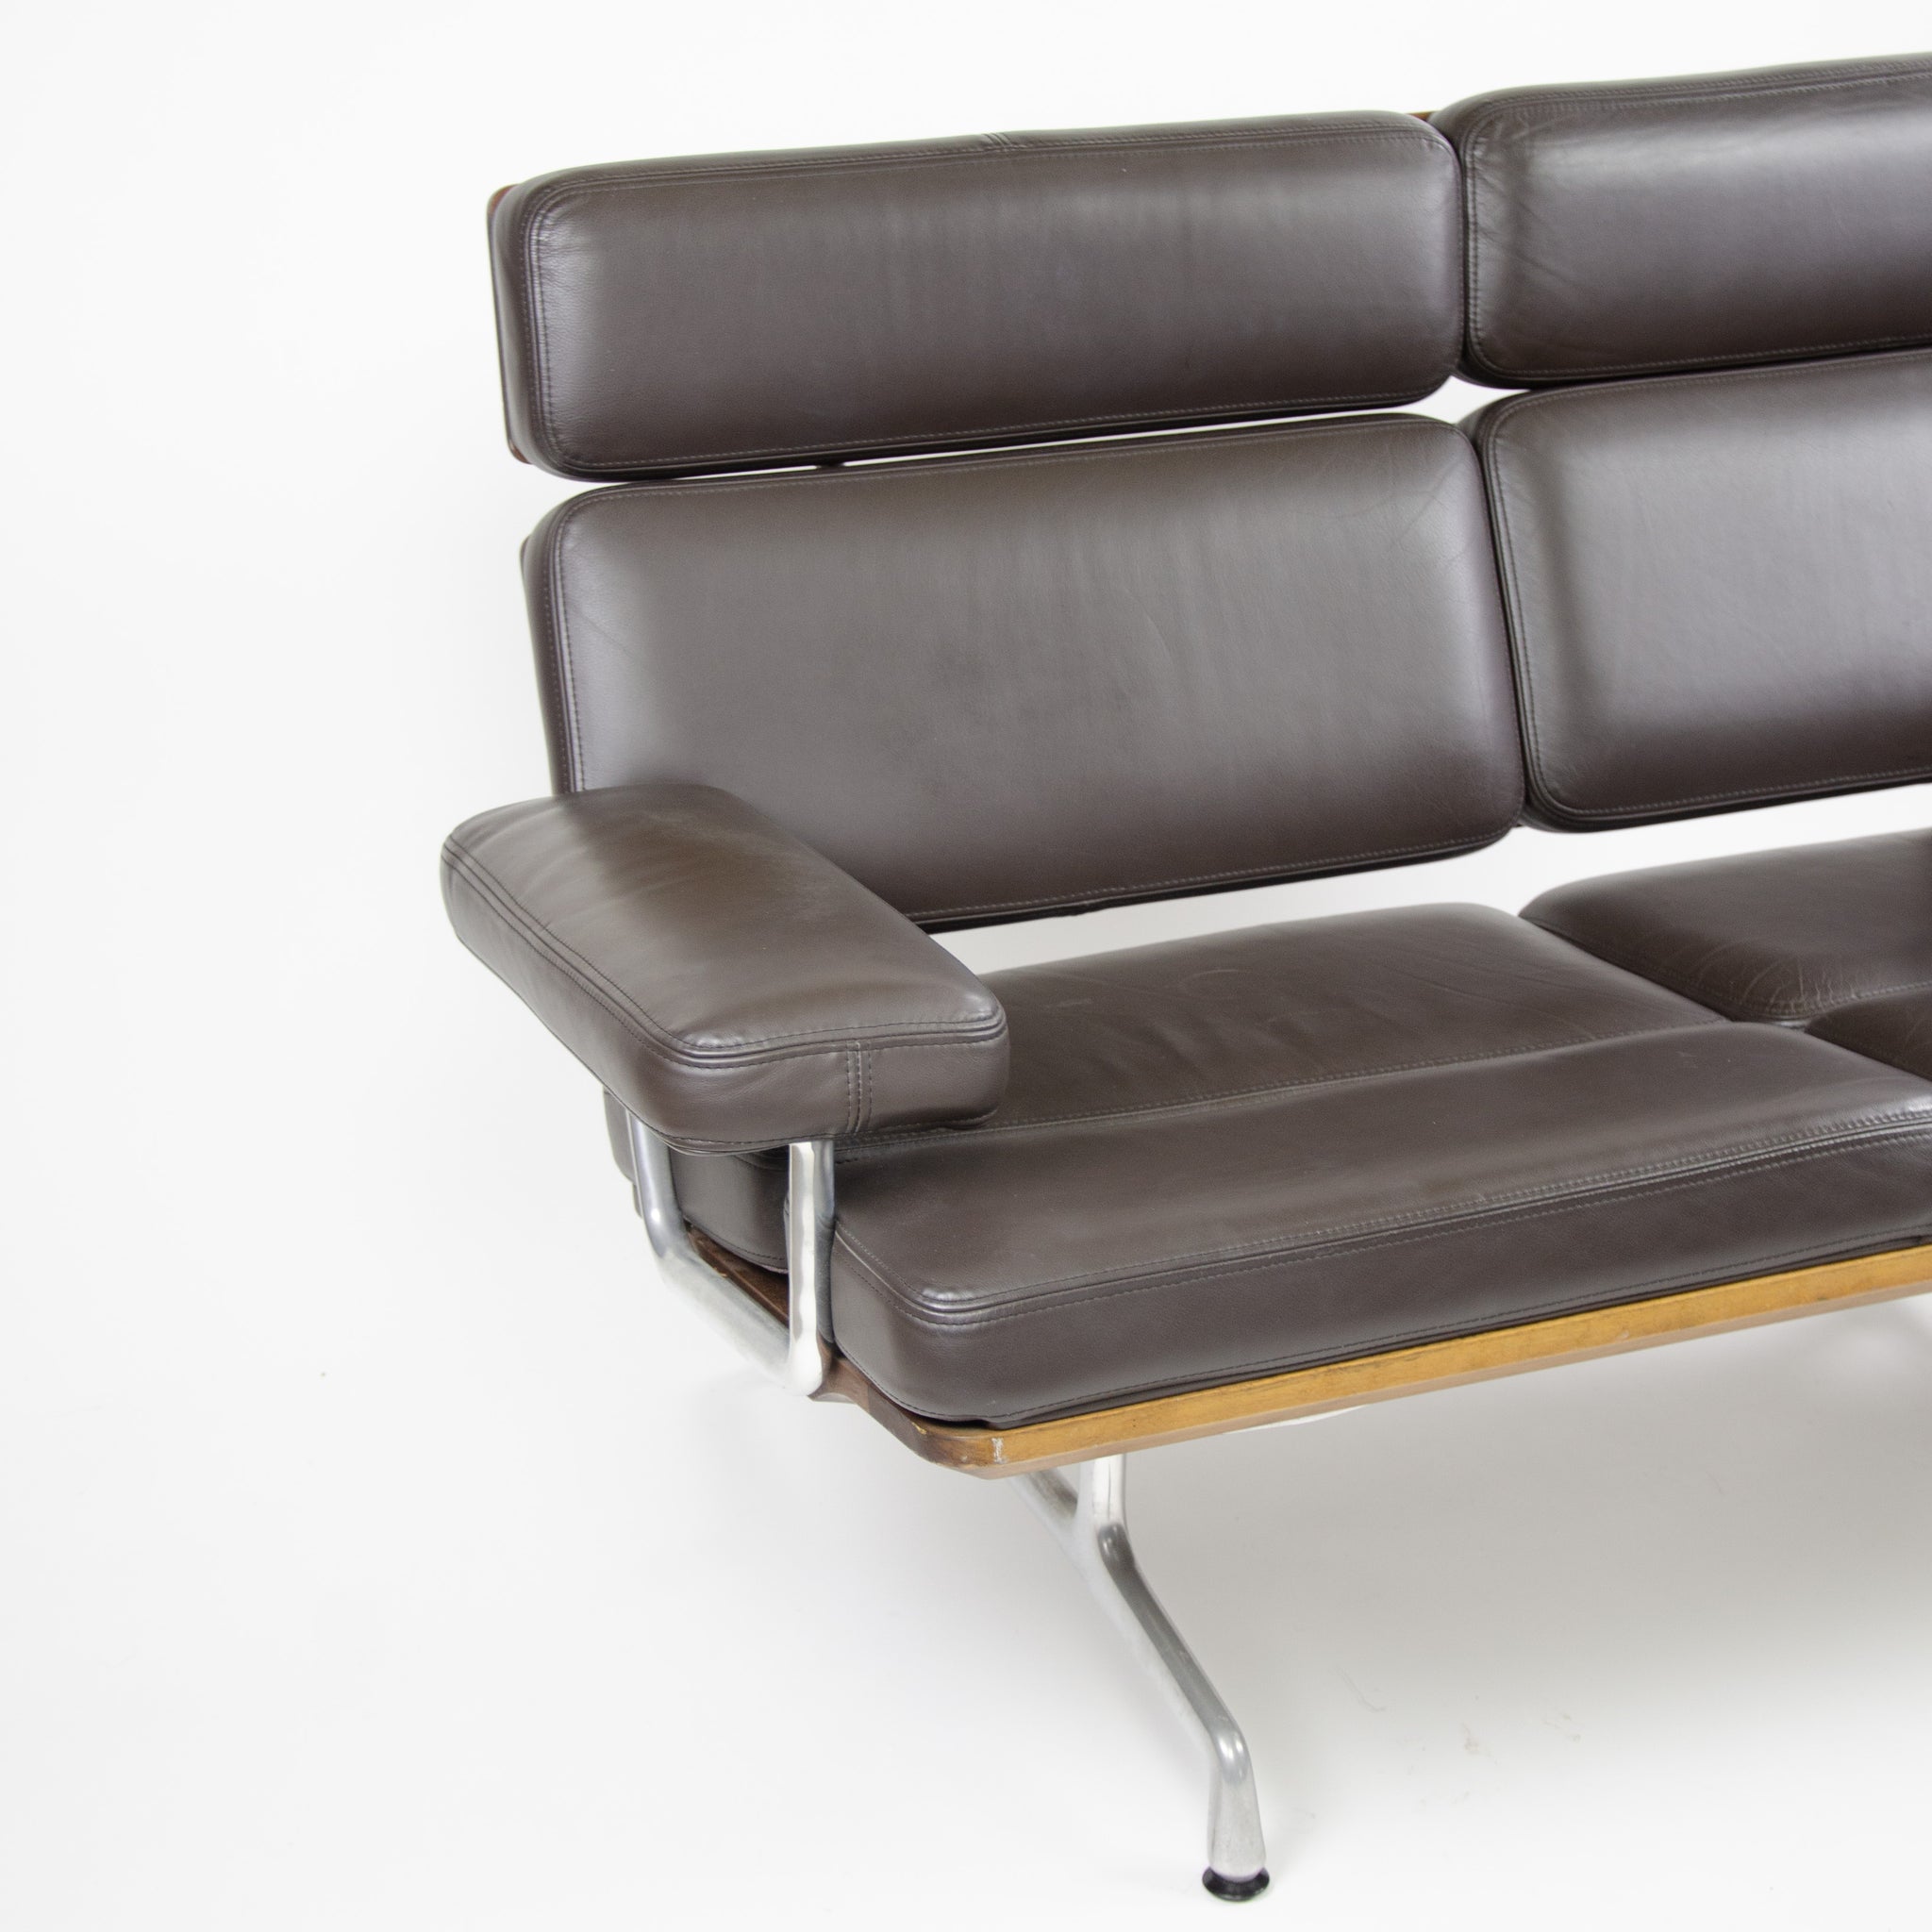 SOLD 2007 Eames Herman Miller Two Seater Sofa Walnut and Brown Leather